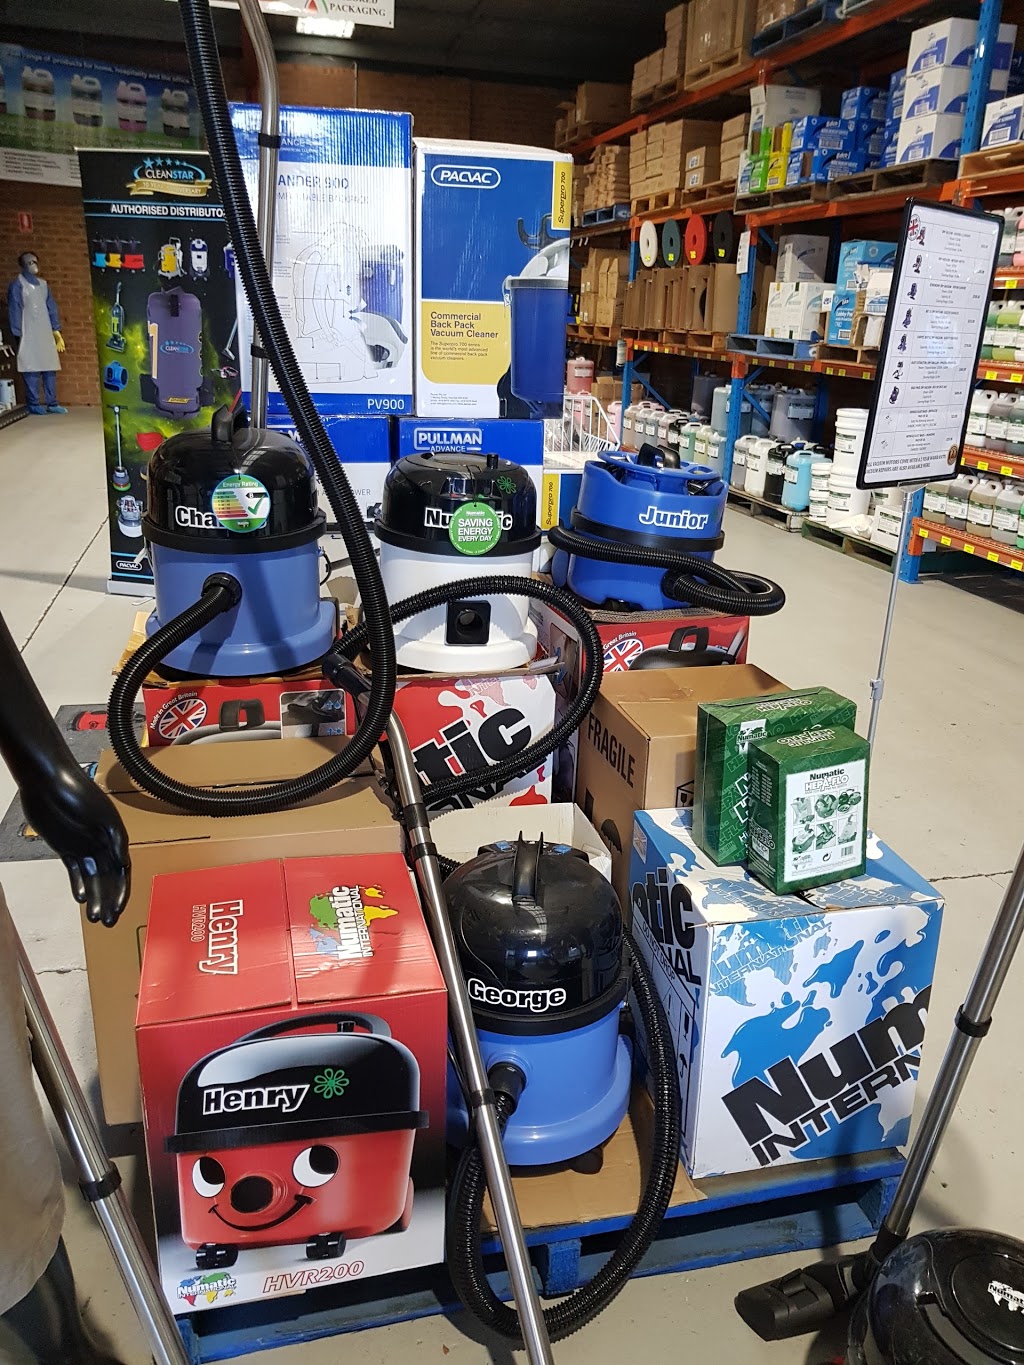 CBC Cleaning Products Pty Ltd. | store | 5a/4 Stout Rd, Mount Druitt NSW 2770, Australia | 0298323338 OR +61 2 9832 3338